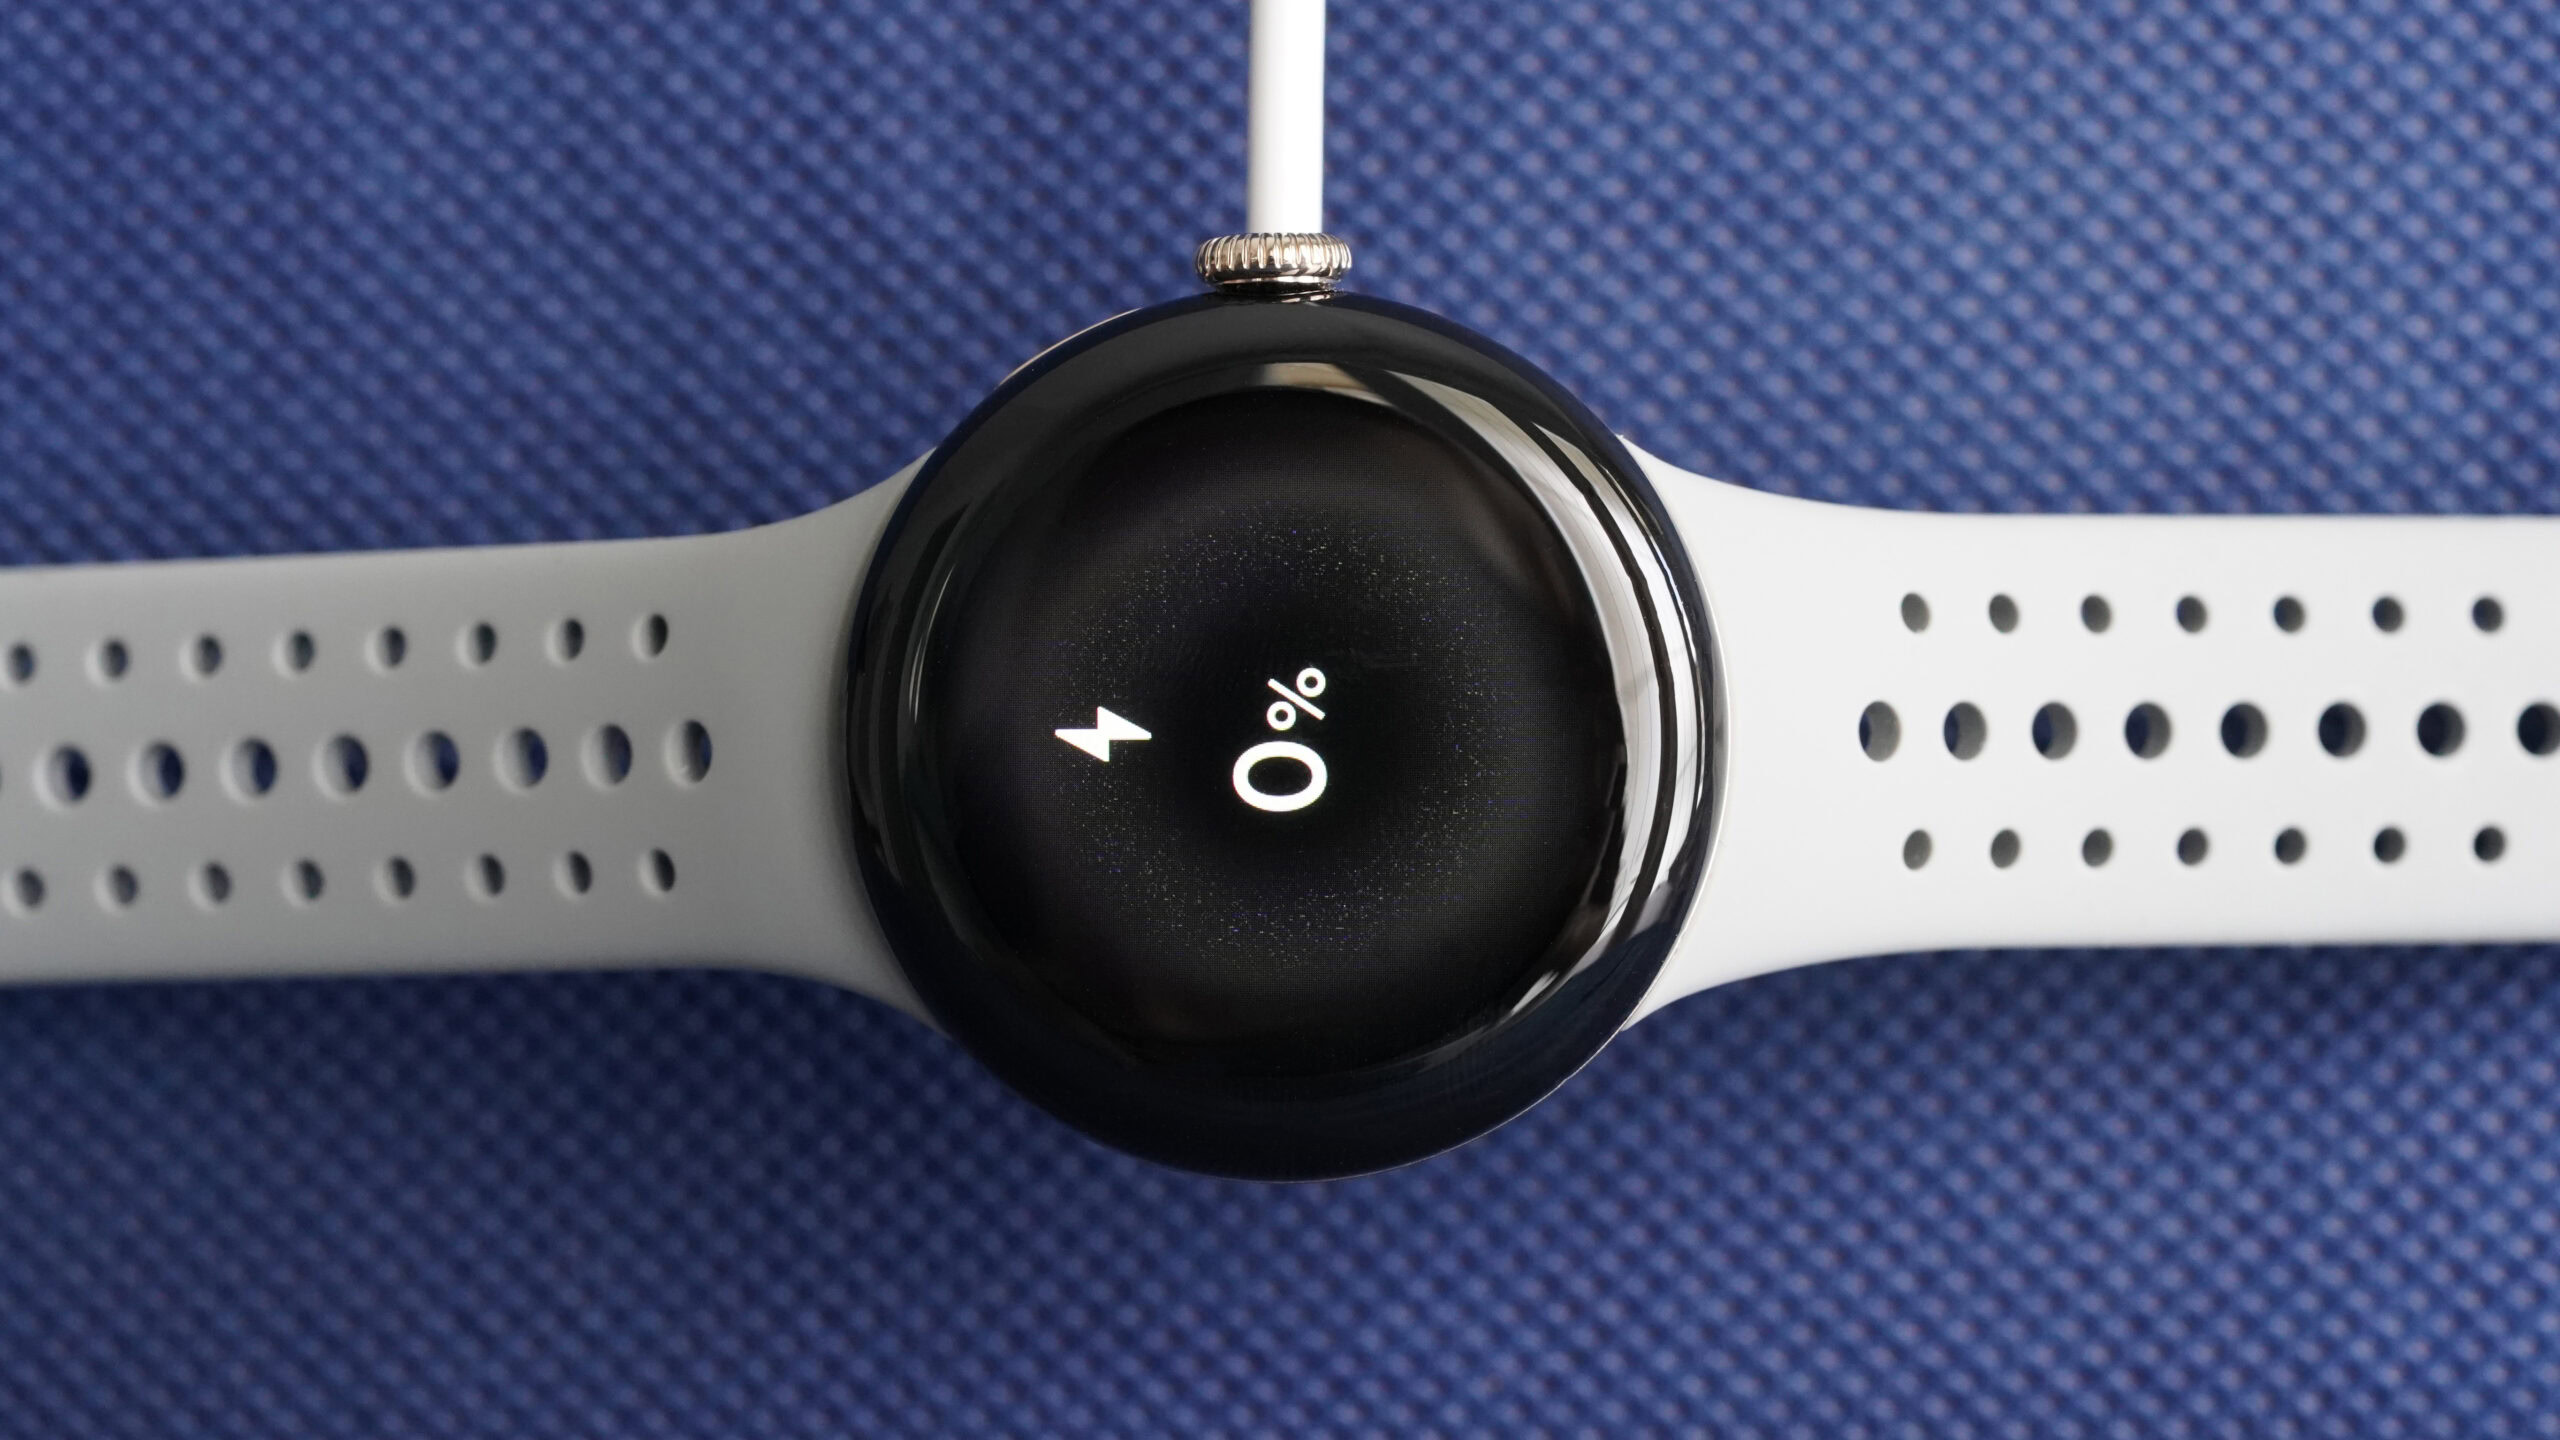 A charging Pixel Watch 2 displays the device's battery status at zero percent.